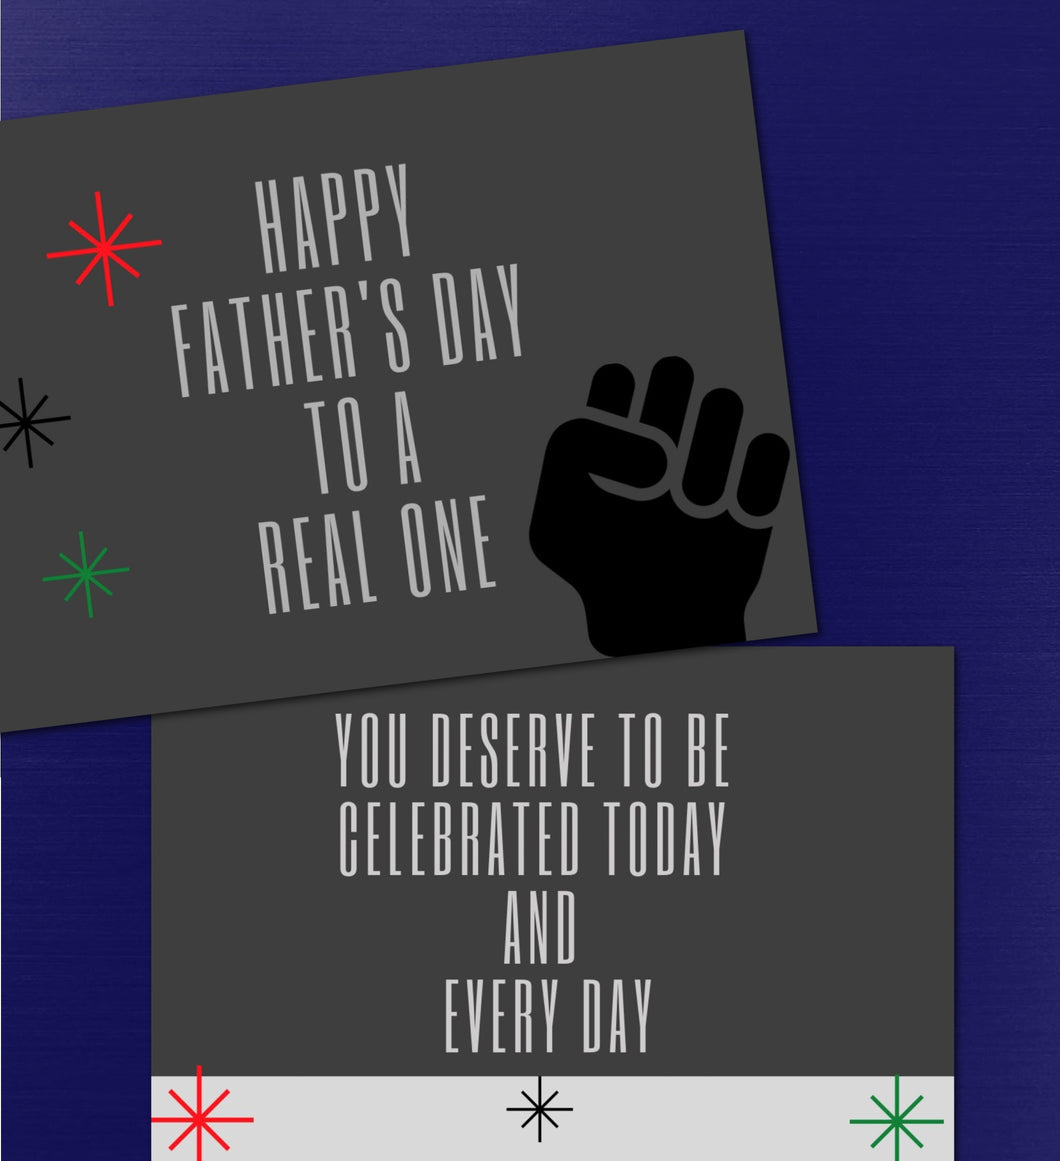 Real One Father's Day Card